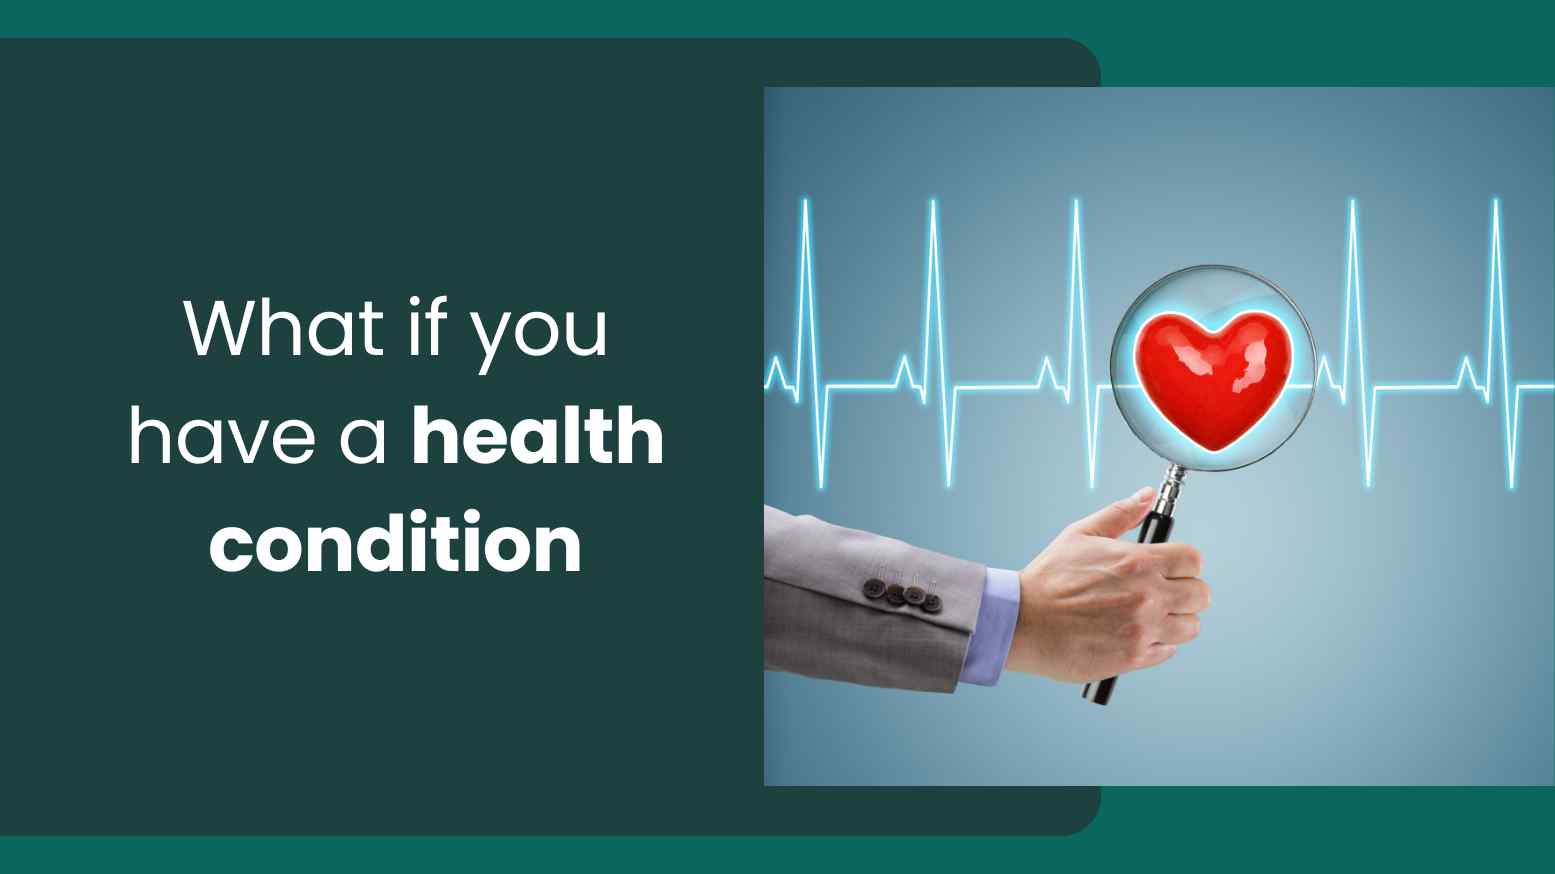 What if you have a health condition